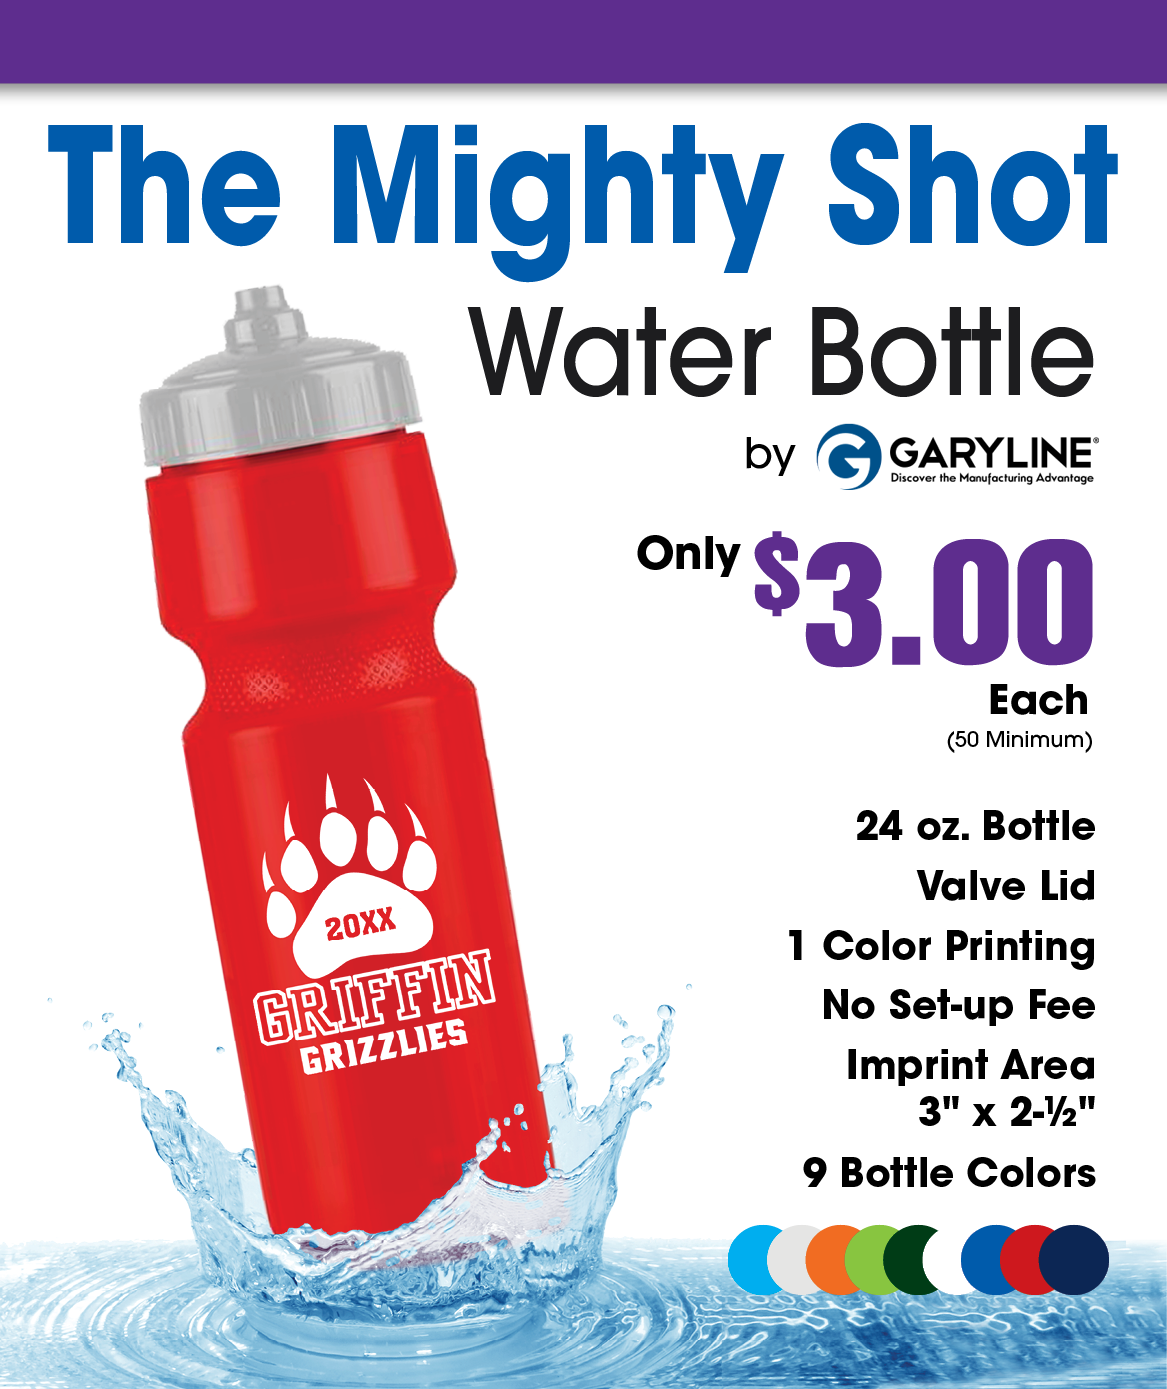 The Mighty Shot Water Bottle Offer